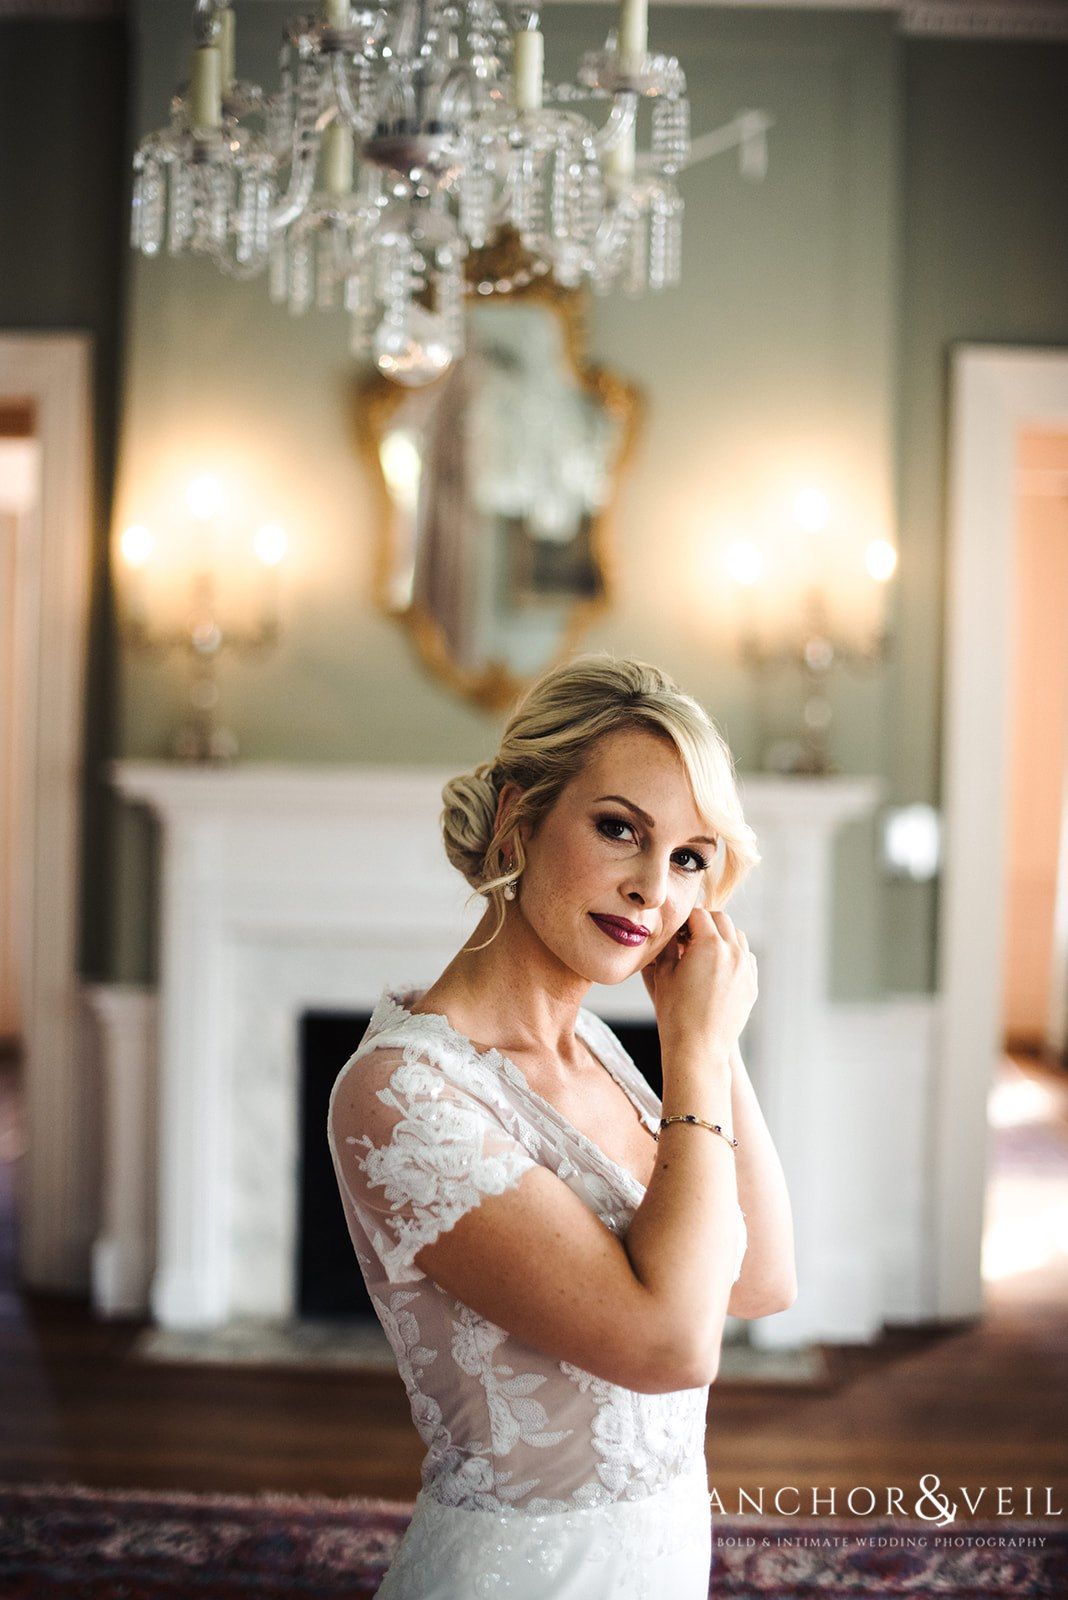 The bride adding the finishing touches at the Lowndes Grove Plantation Wedding